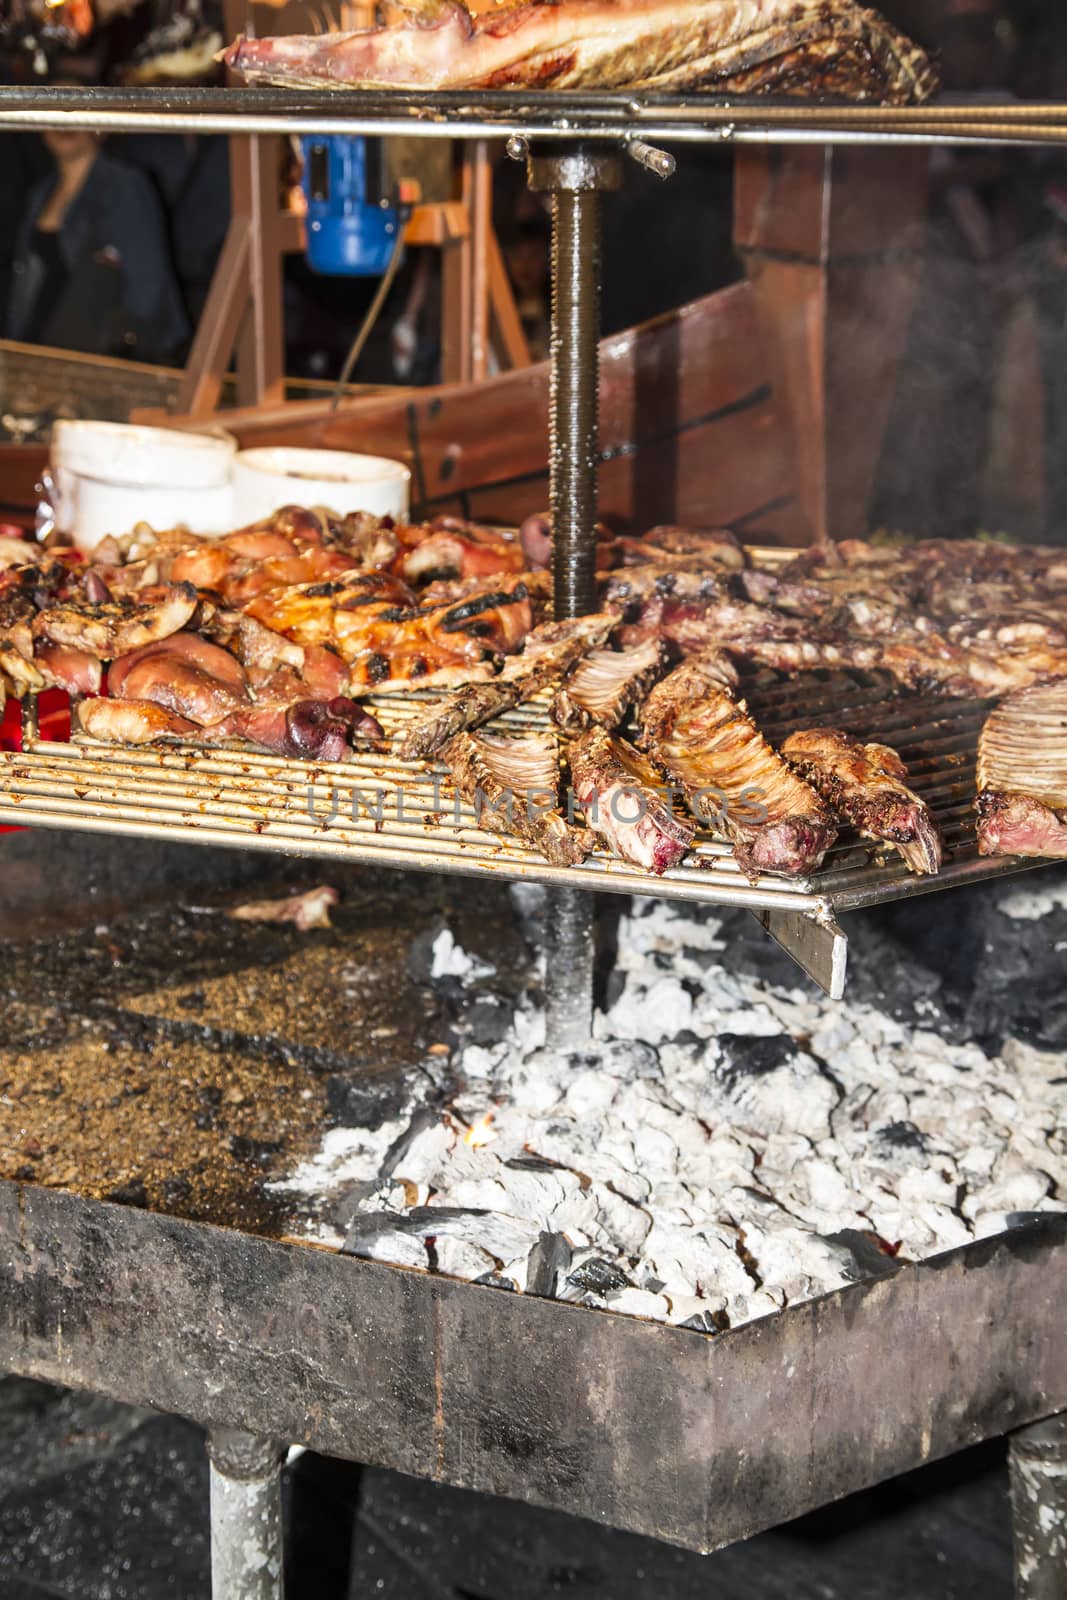 barbecue with sausages and lamb in a medieval fair, Spain by FernandoCortes